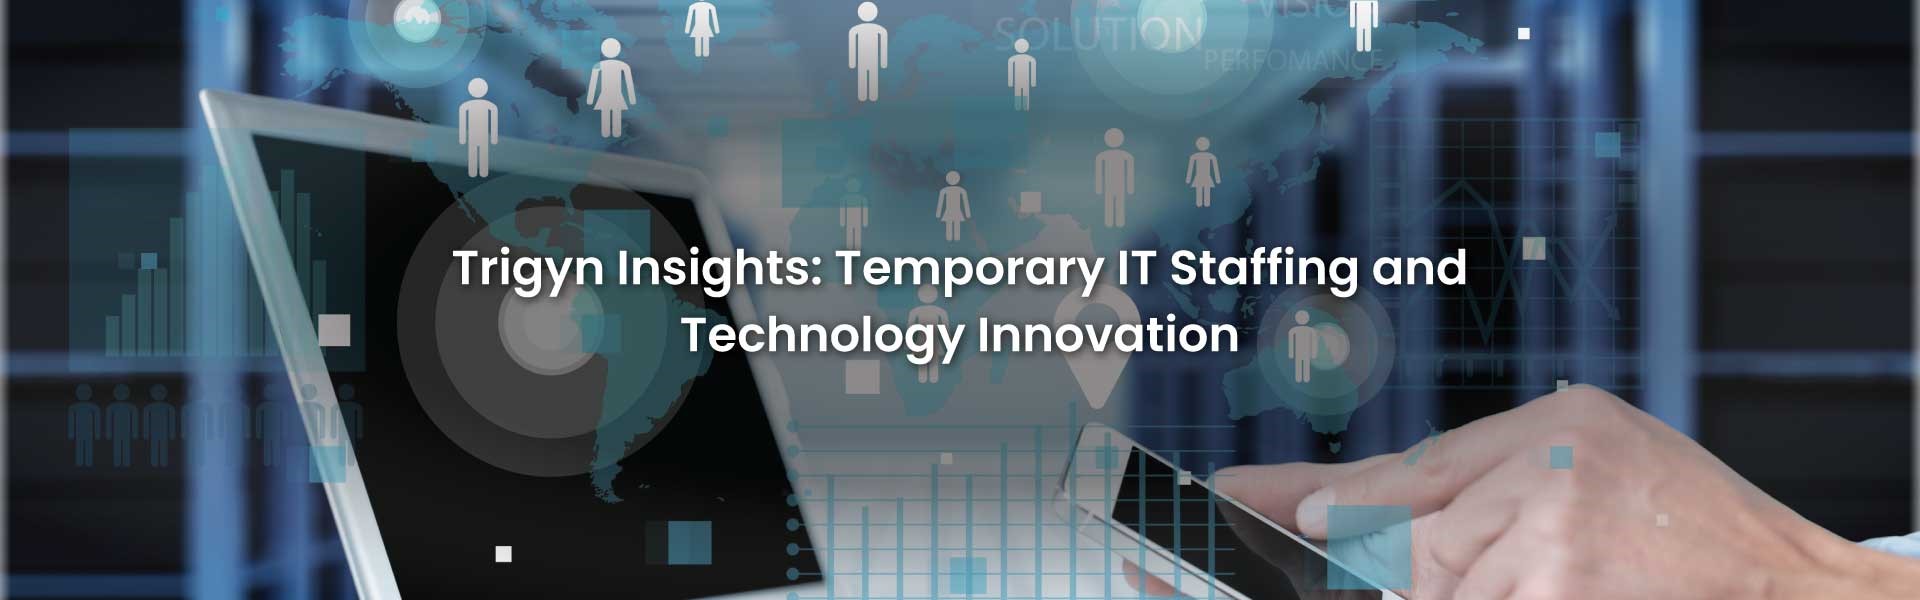 IT Staffing and Technology Innovation 